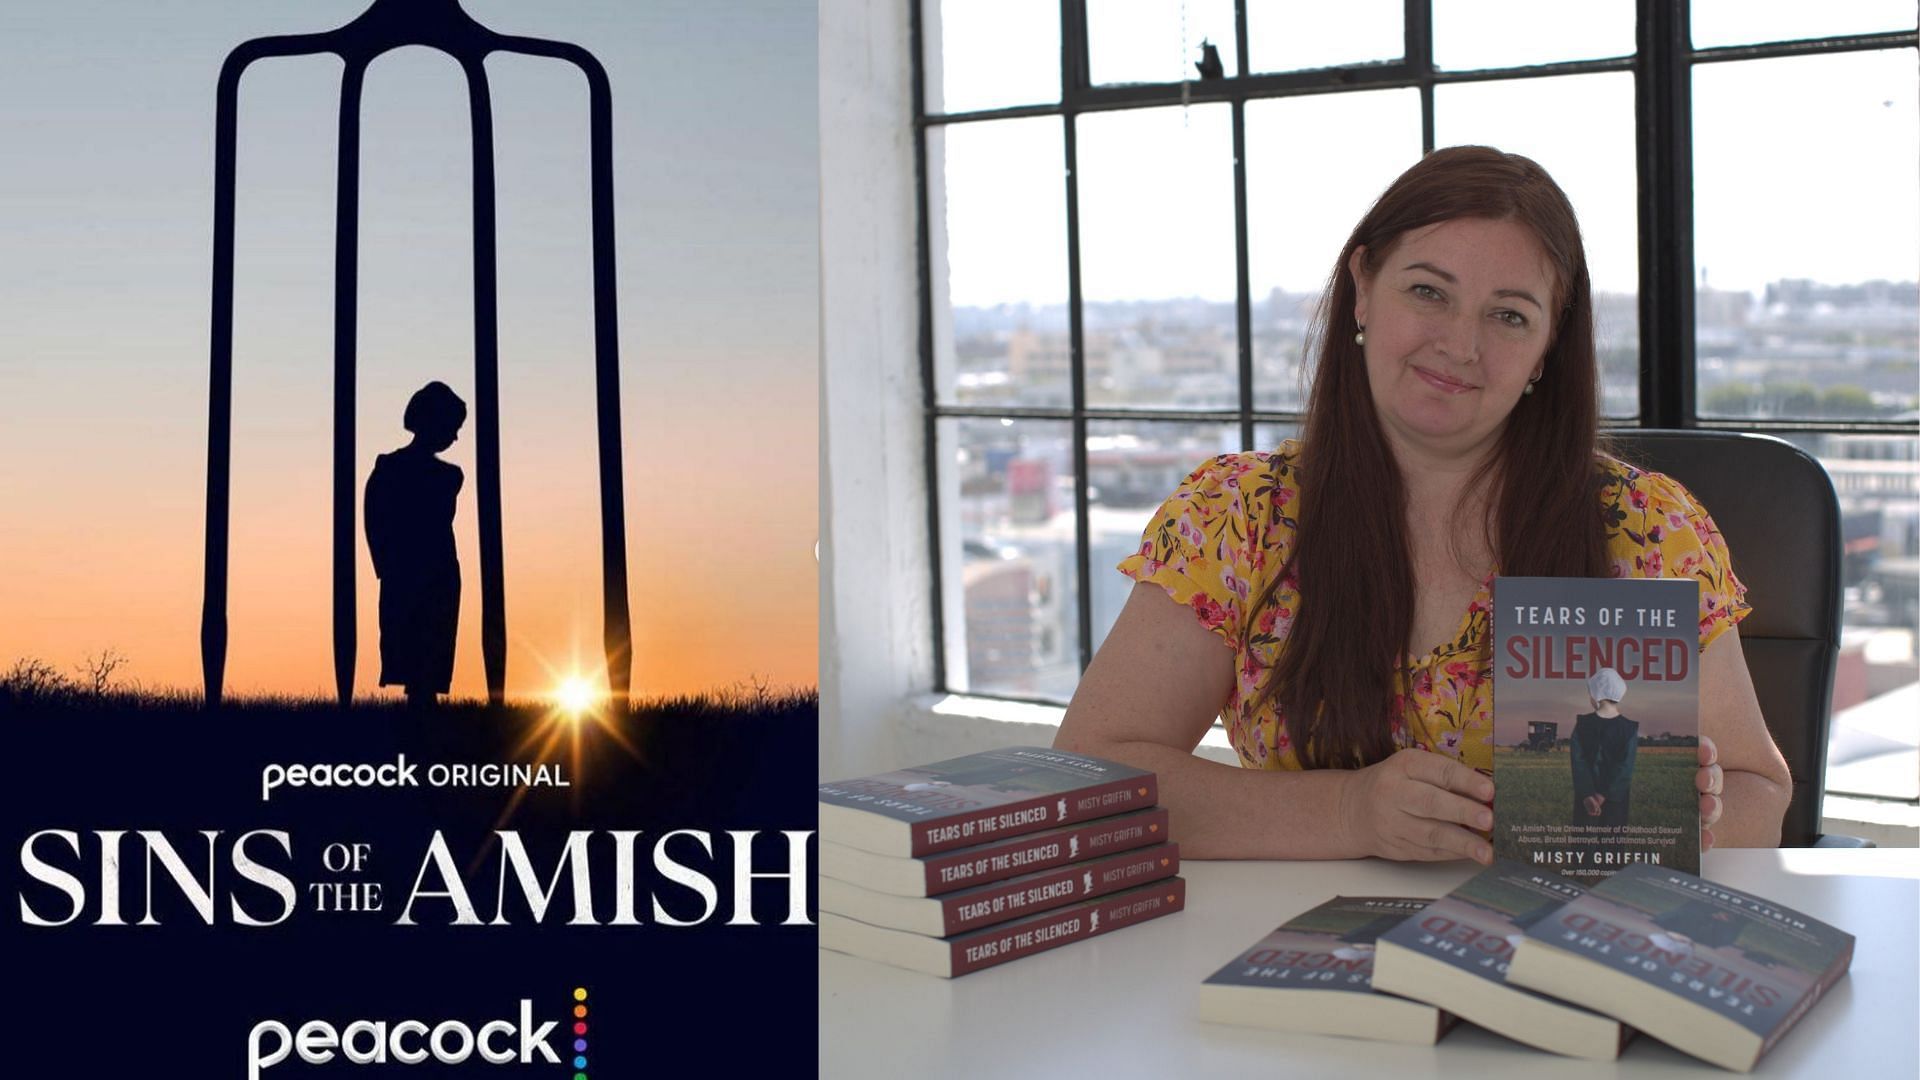 Peacock&#039;s Sins of the Amish will premiere, narrating the story of Misty Griffin among other women, on May 24 (Image via @jasper.c.hoffman/Instagram, @Misty_E_Griffin/Twitter)